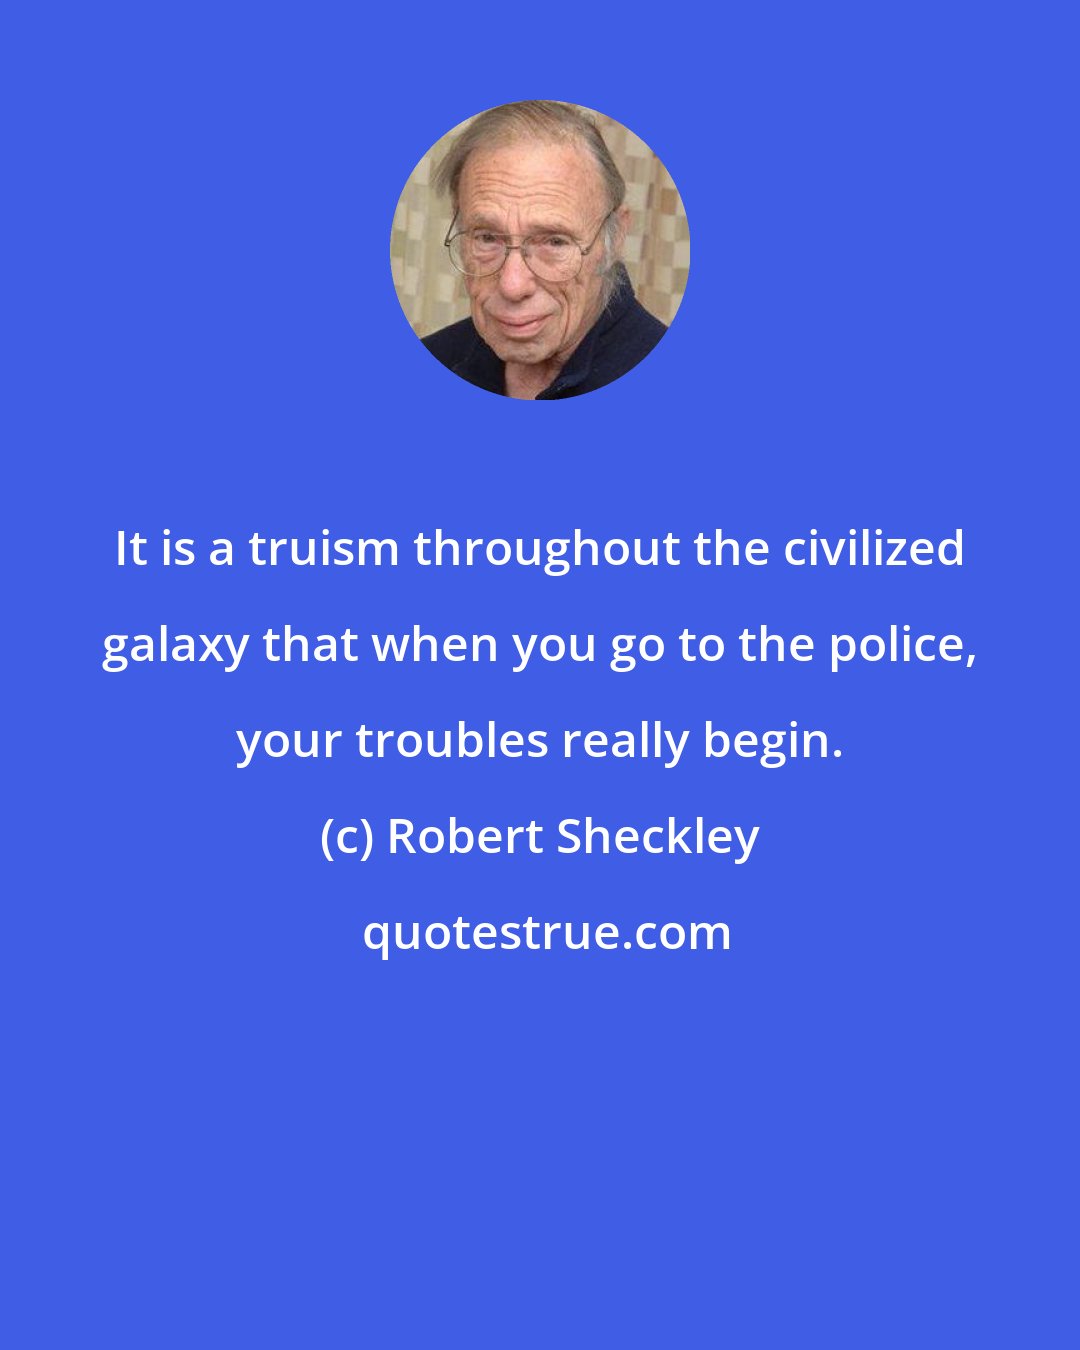 Robert Sheckley: It is a truism throughout the civilized galaxy that when you go to the police, your troubles really begin.